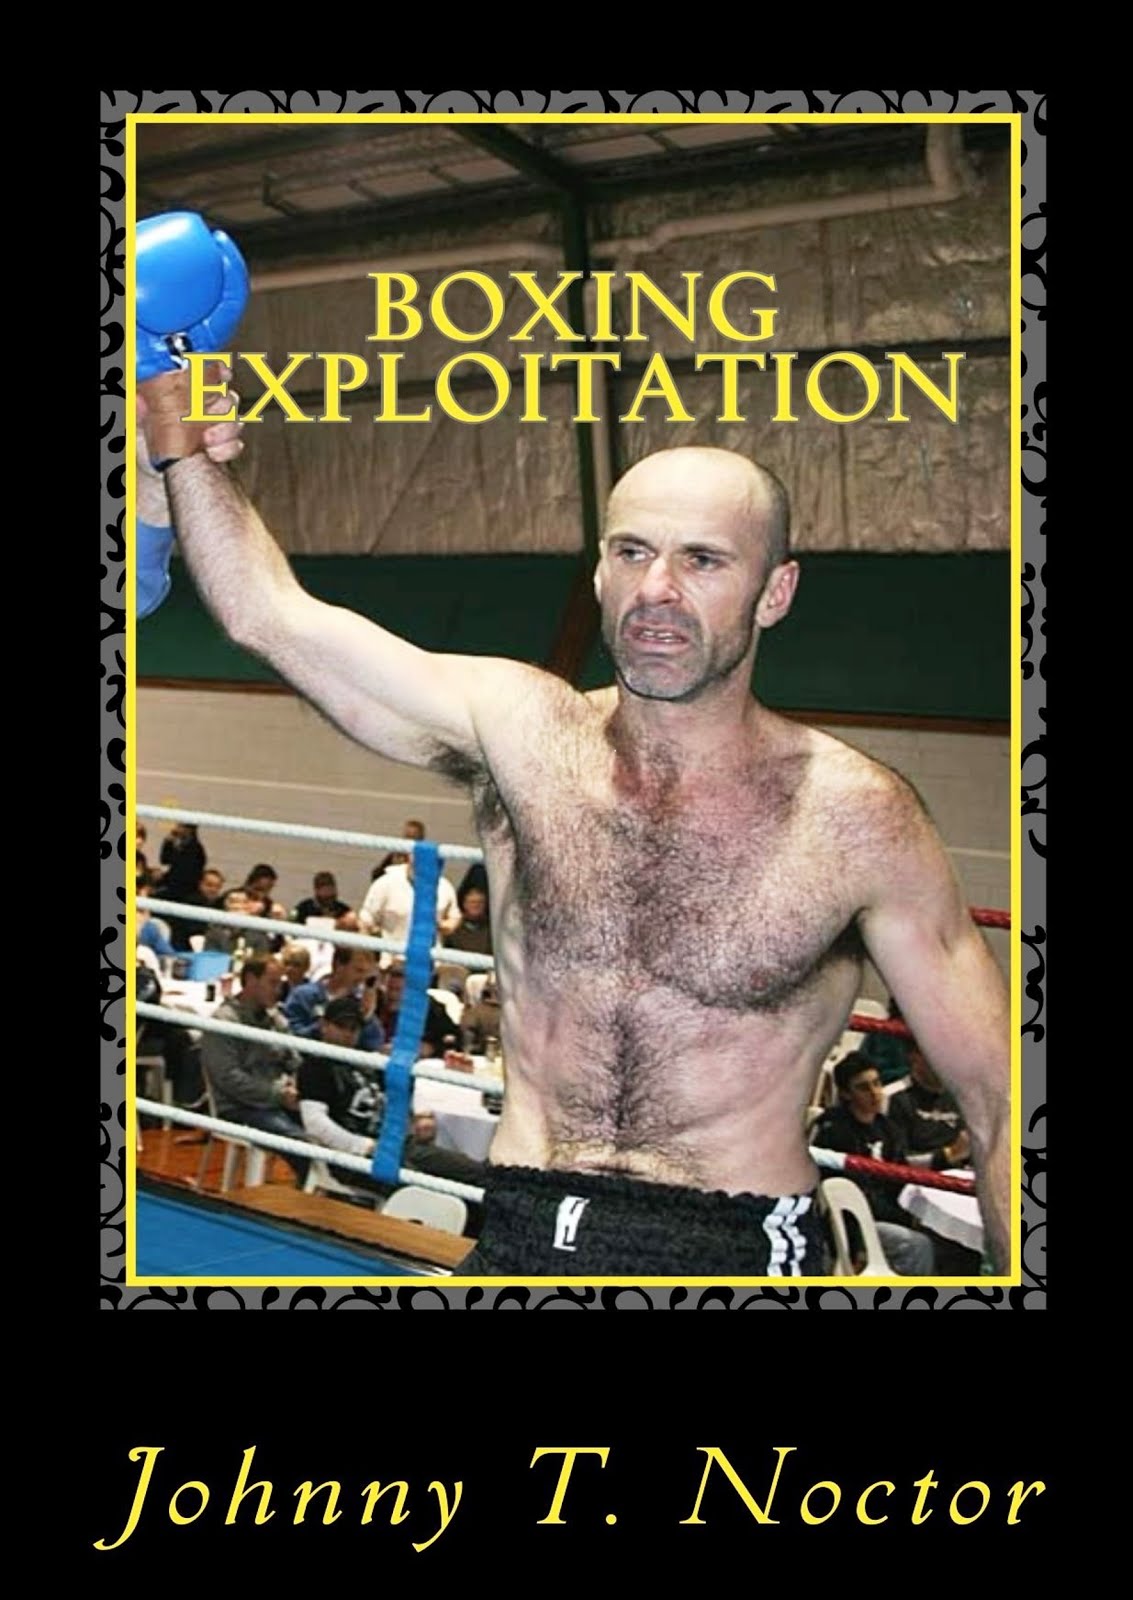 Boxing Exploitation (Book 4) The Hobo Chronicles. Click Cover to buy on Amazon